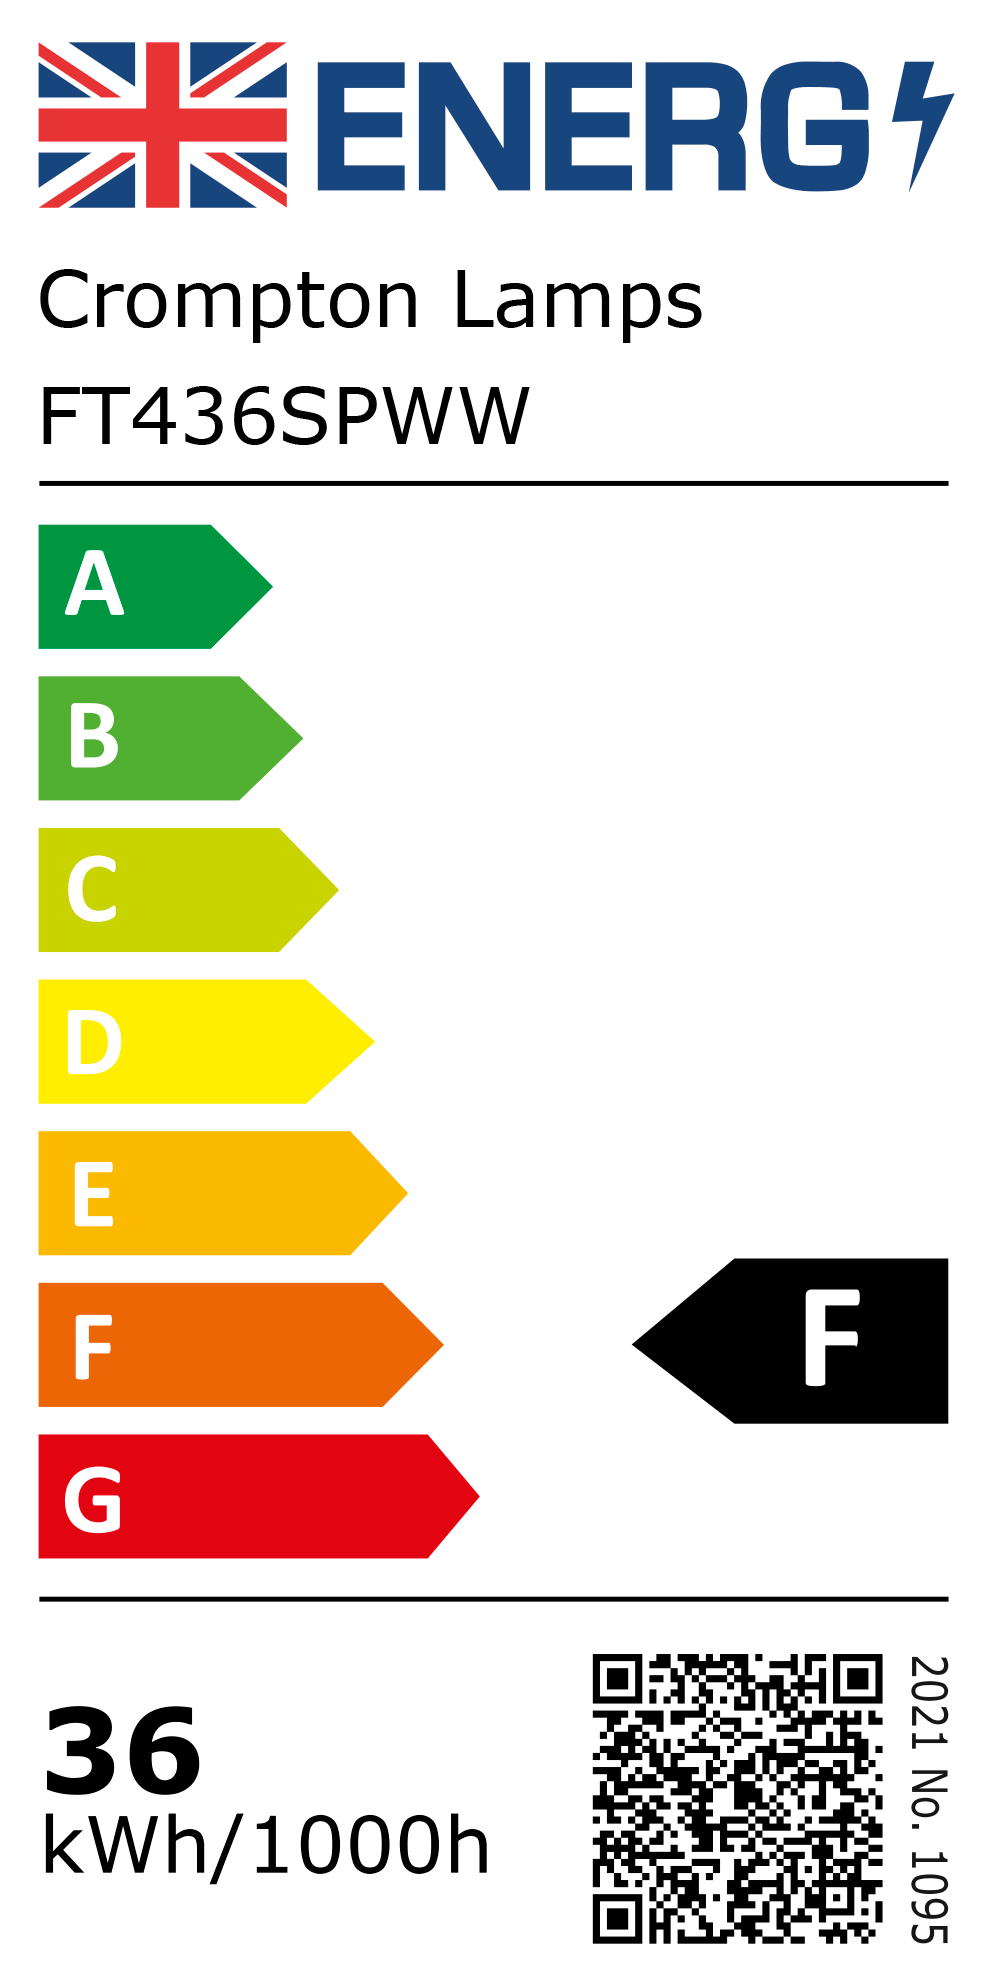 New 2021 Energy Rating Label: Stock Code FT436SPWW